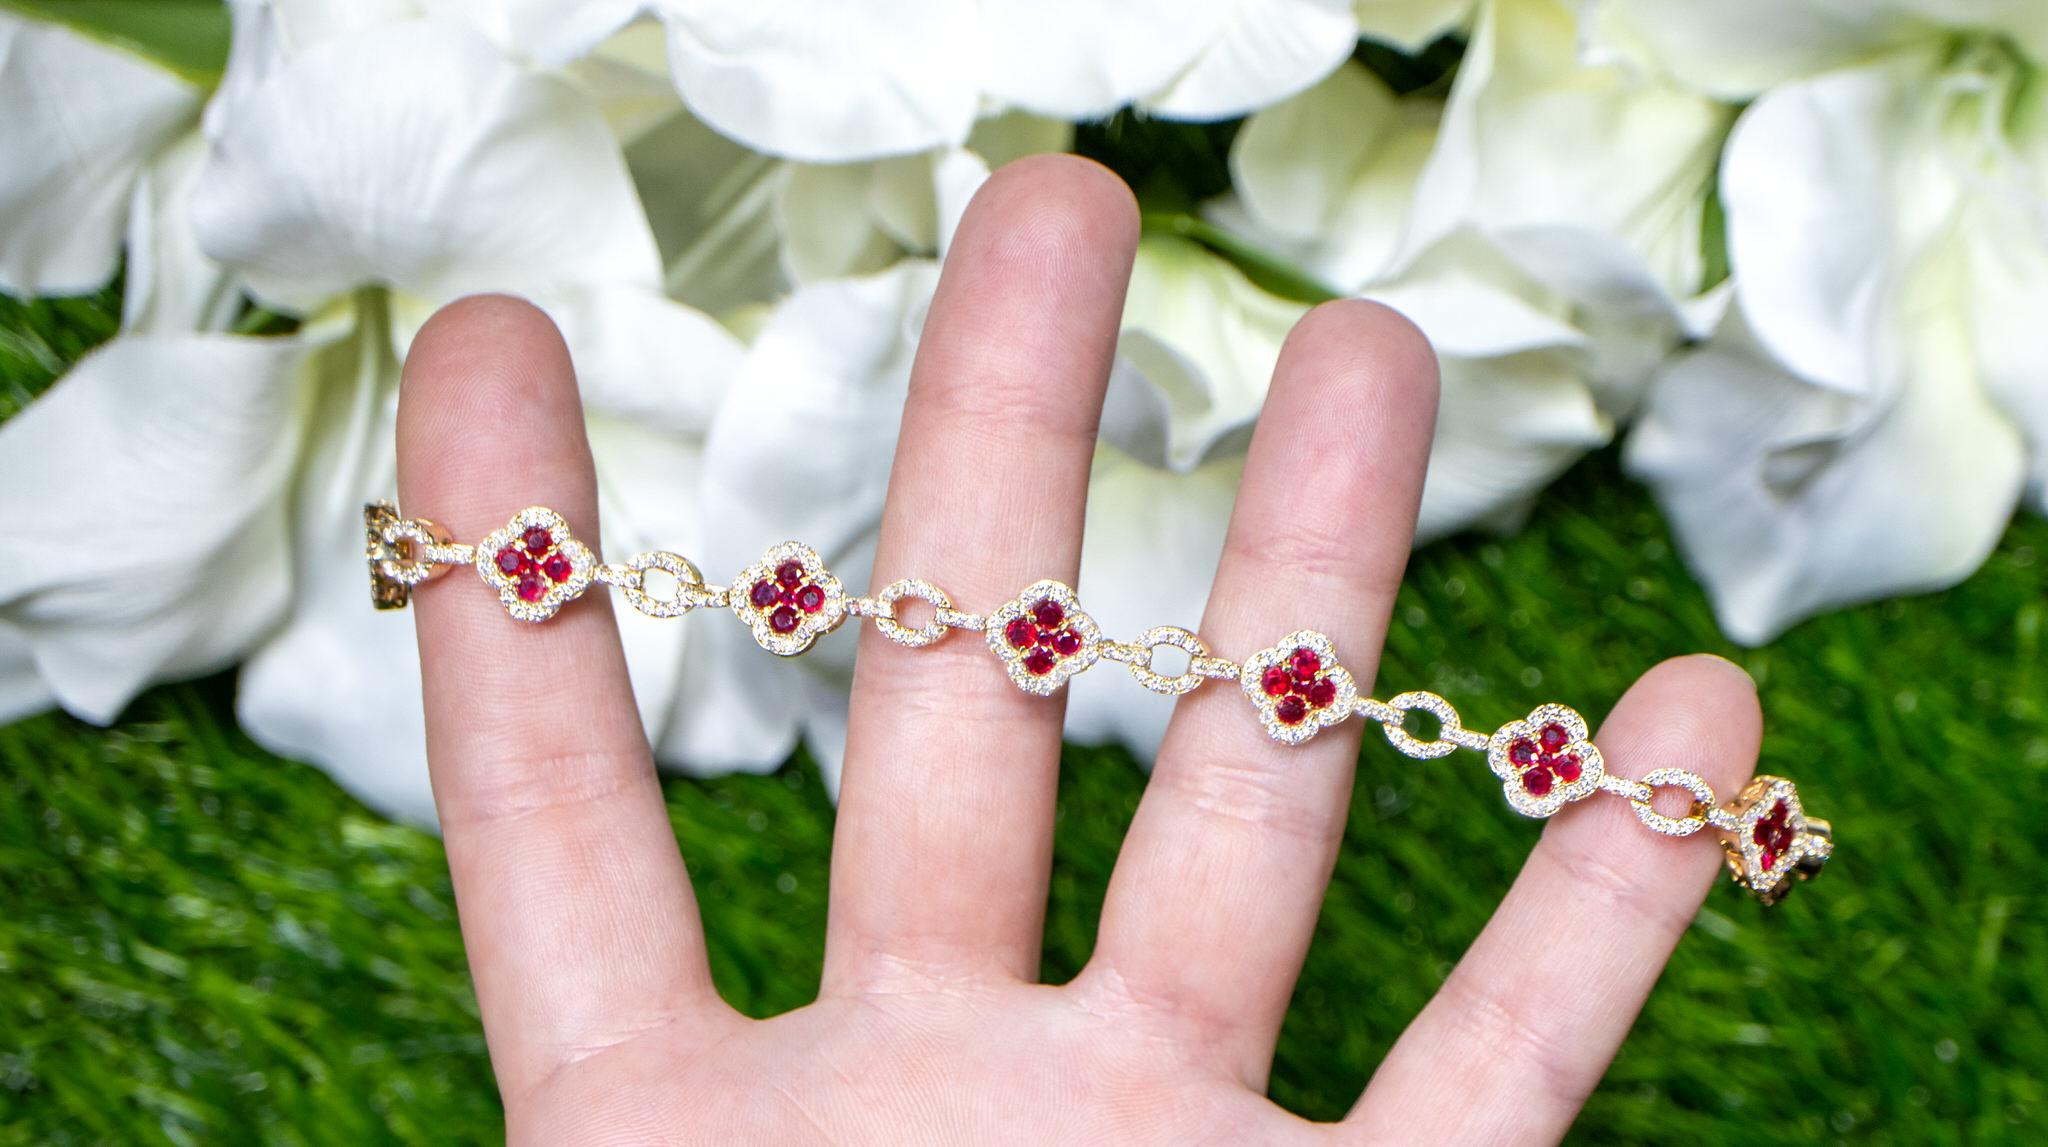 Clover Ruby Bracelet Diamond Links 5.45 Carats 18K Yellow Gold In Excellent Condition For Sale In Laguna Niguel, CA